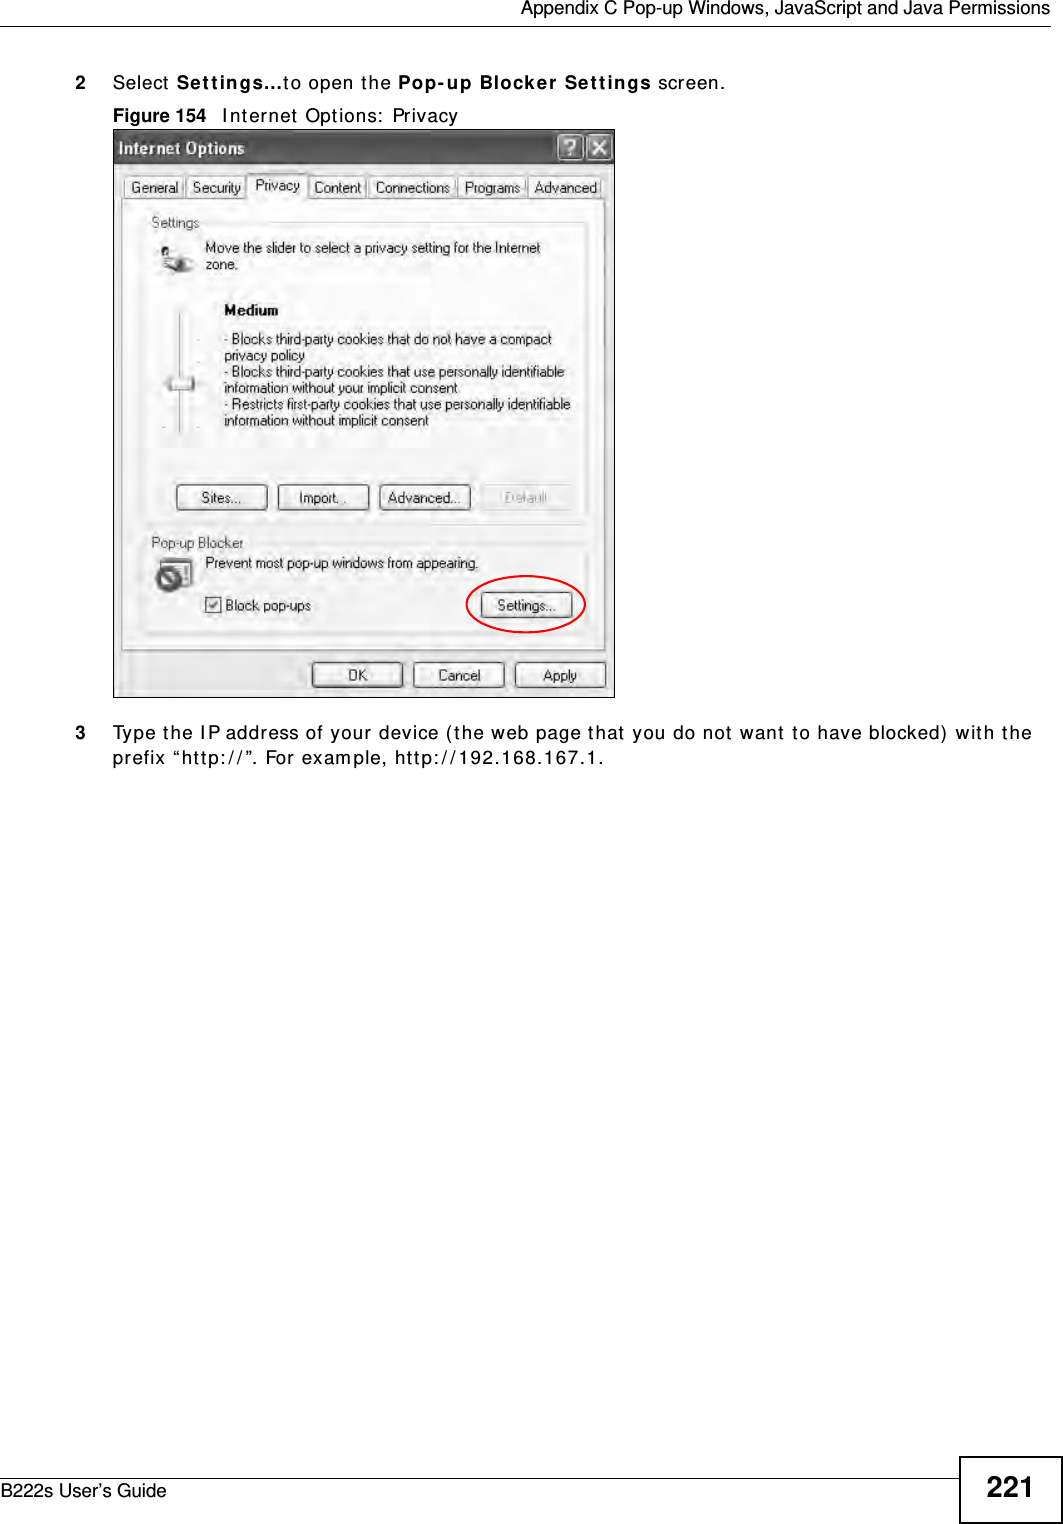  Appendix C Pop-up Windows, JavaScript and Java PermissionsB222s User’s Guide 2212Select  Se t t in gs…t o open t he Pop- up Block er Set t ings screen.Figure 154   I nt ernet  Opt ions:  Privacy3Type t he I P address of your  device ( the web page t hat you do not  want  t o have blocked)  wit h t he prefix “ ht t p: / / ”. For exam ple, htt p: / / 192.168.167.1. 